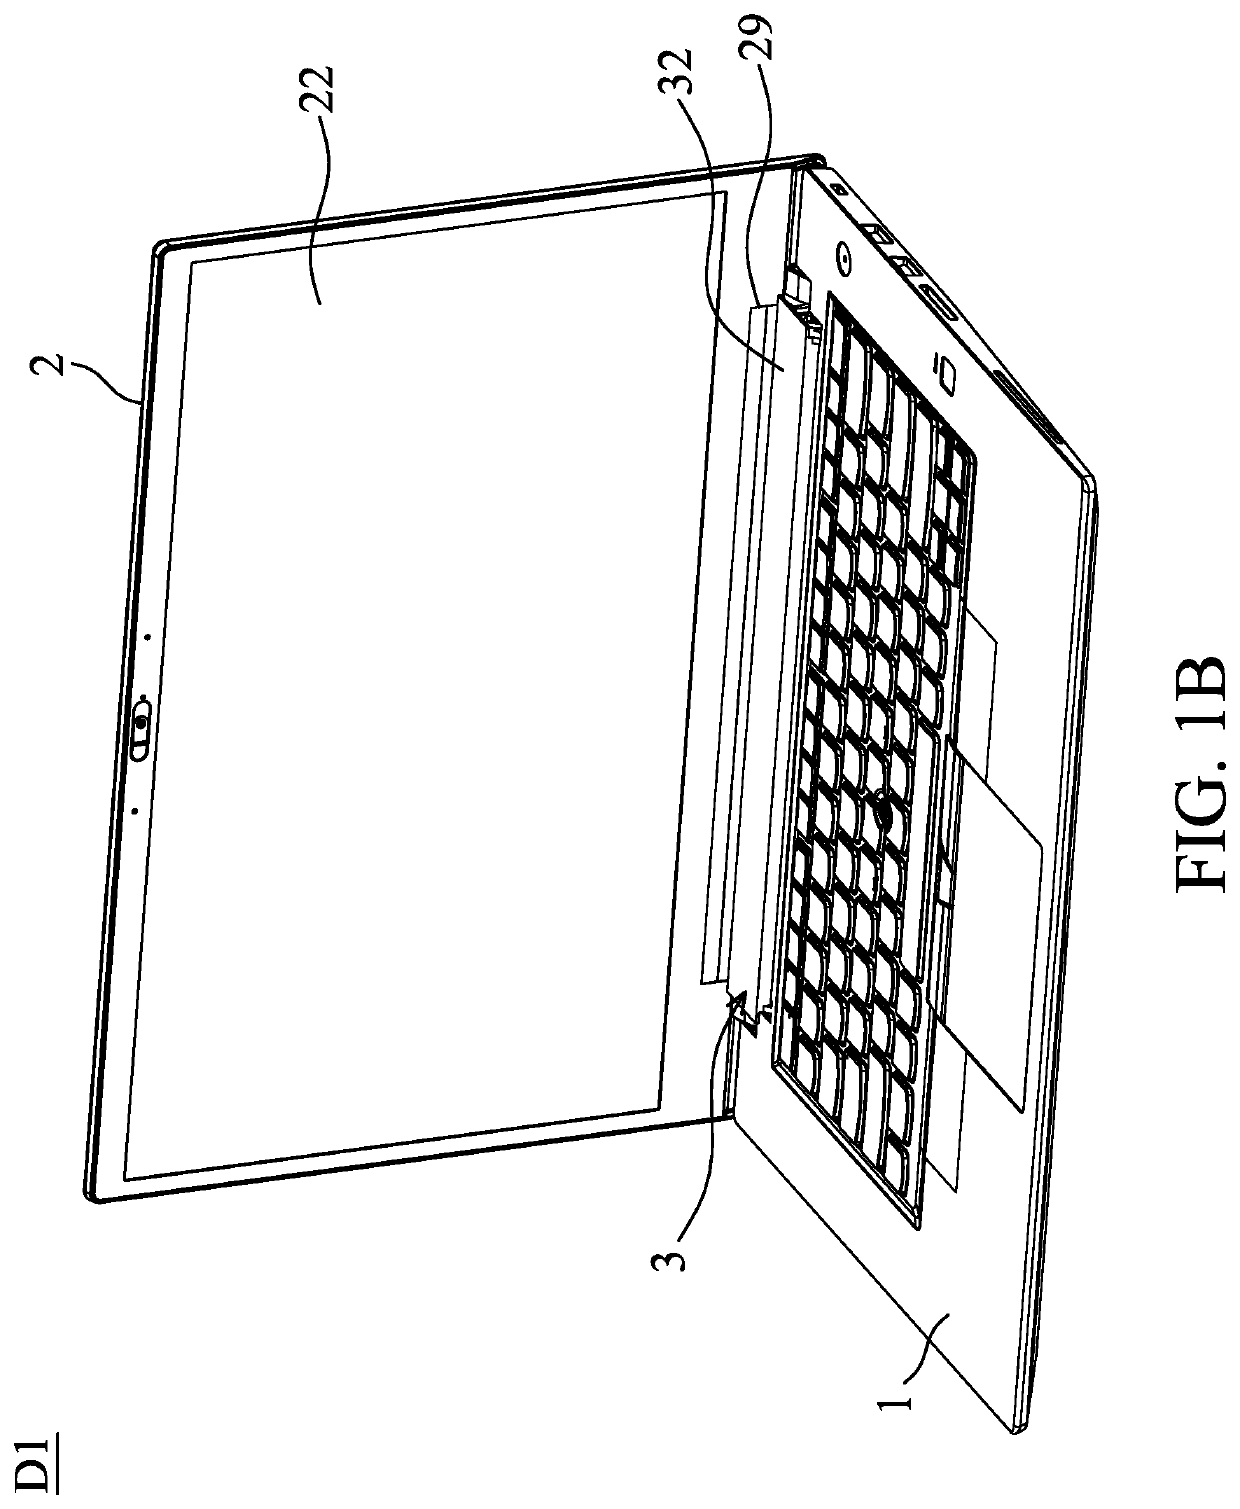 Clamshell electronic device